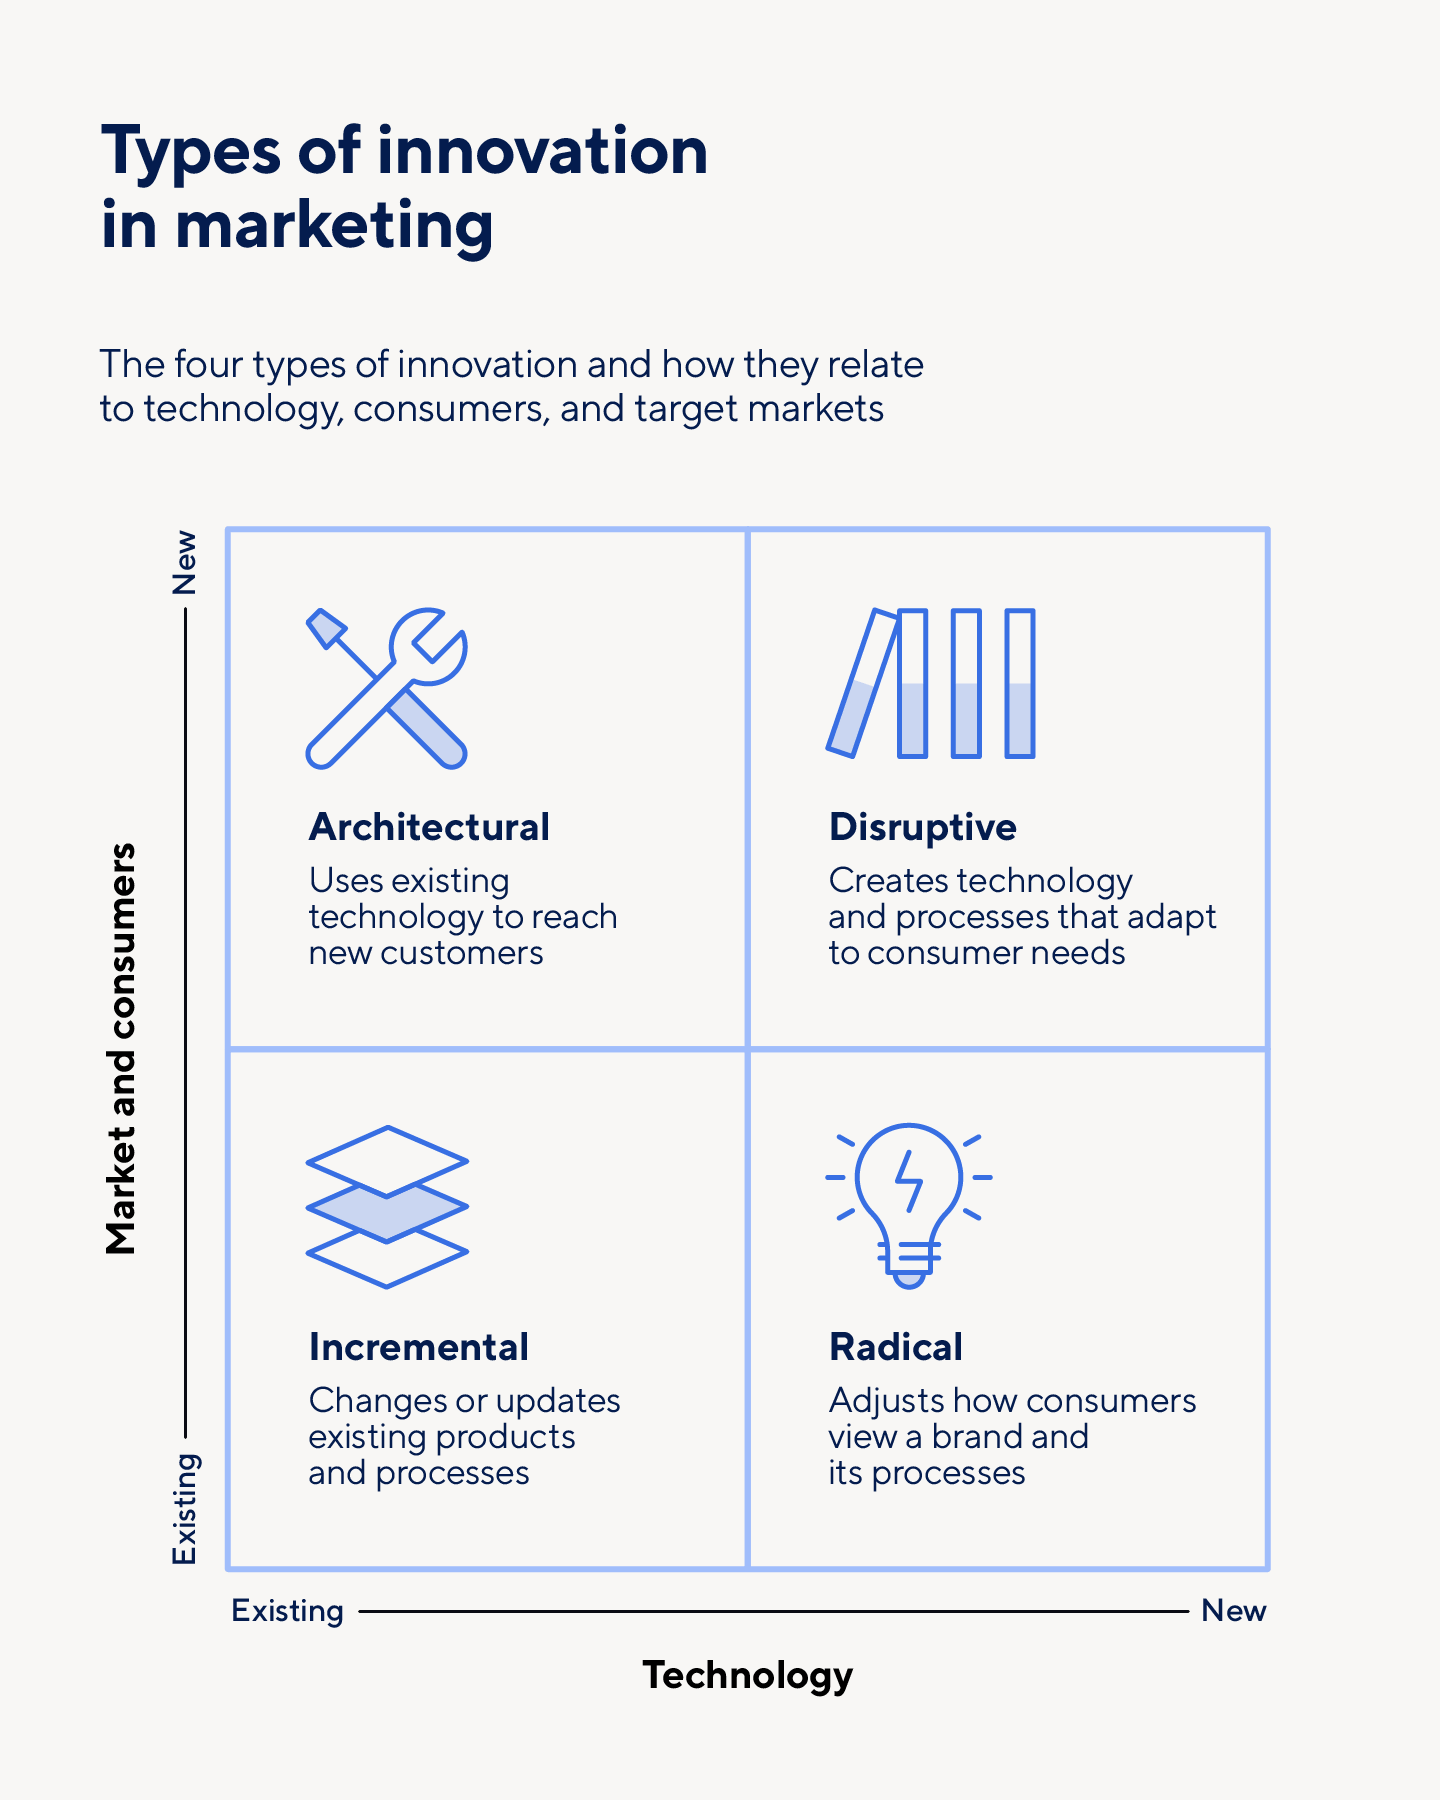 The types of innovation in marketing, including architectural, disruptive, incremental, and radical.